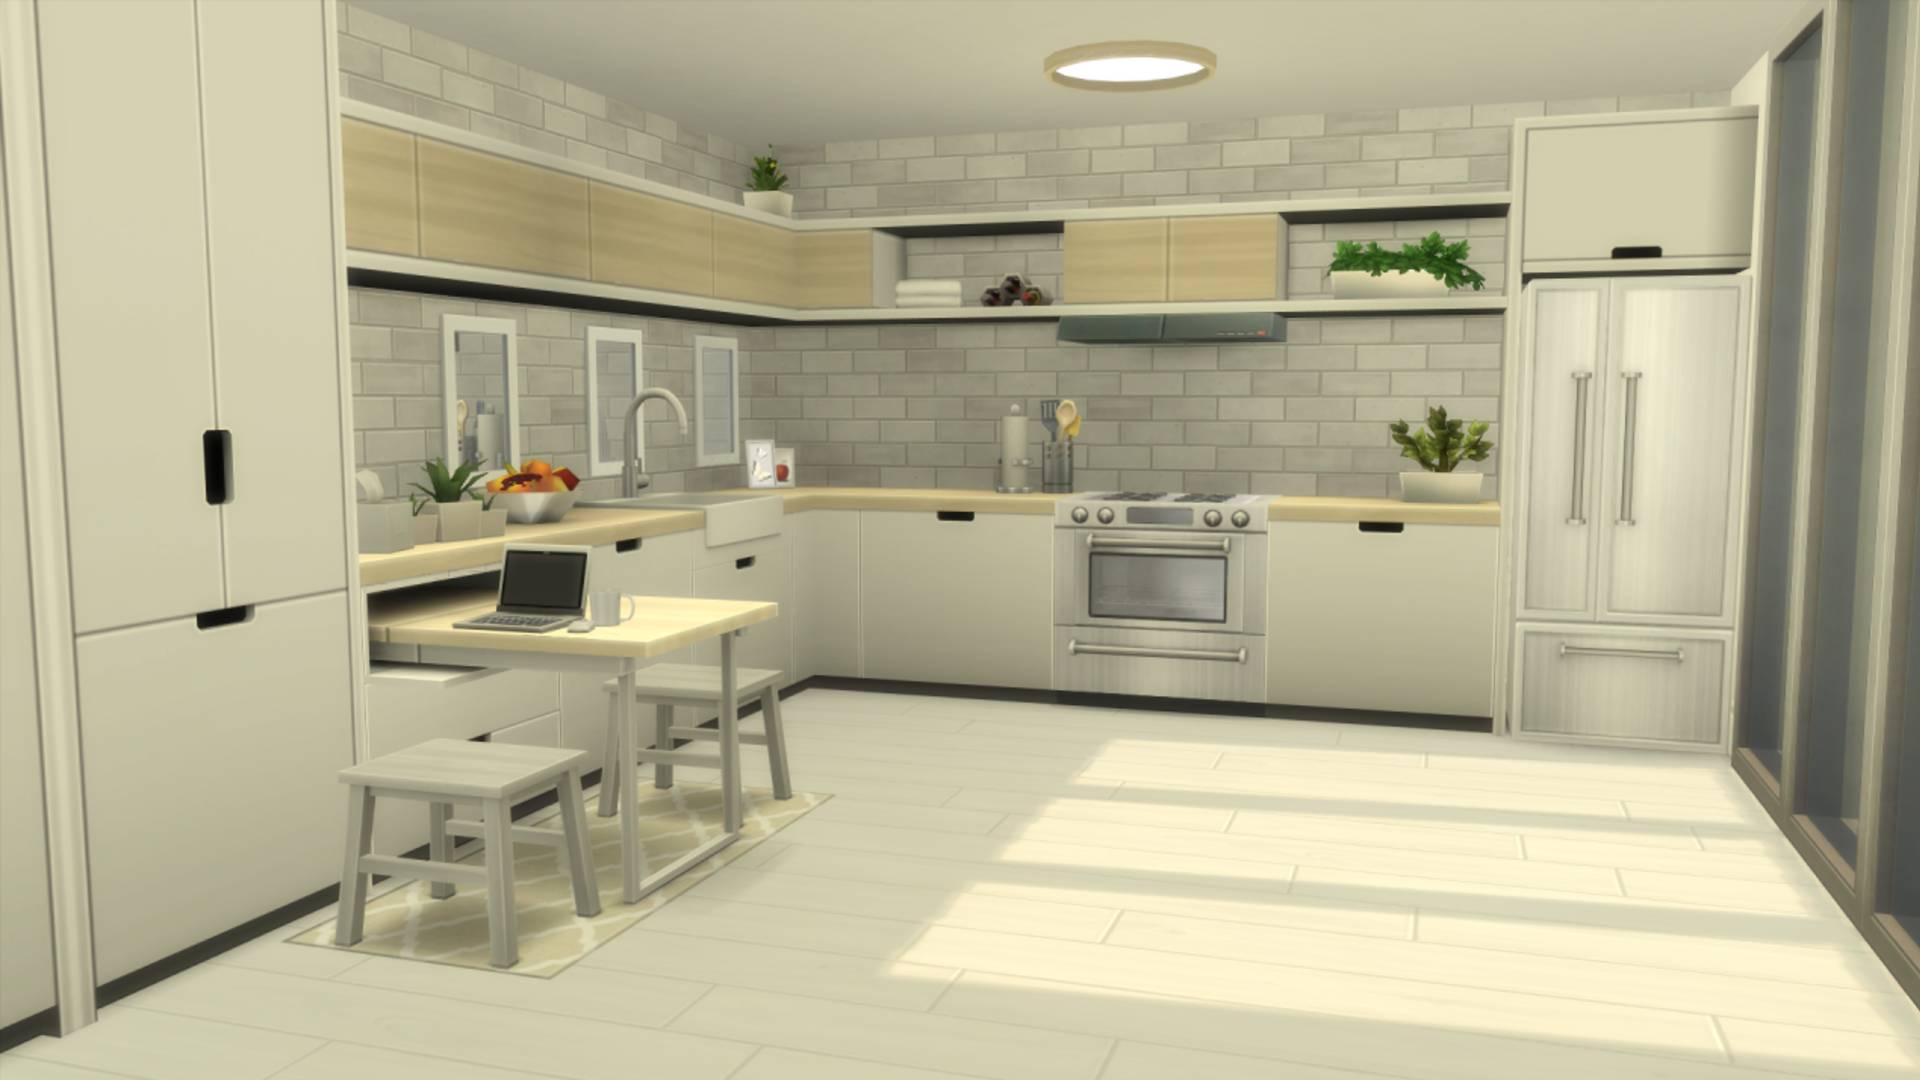 Sims 4 CC: A kitchen that matches the minimalist look of the living room, including a pull-out breakfast table attached to one of the kitchen units.